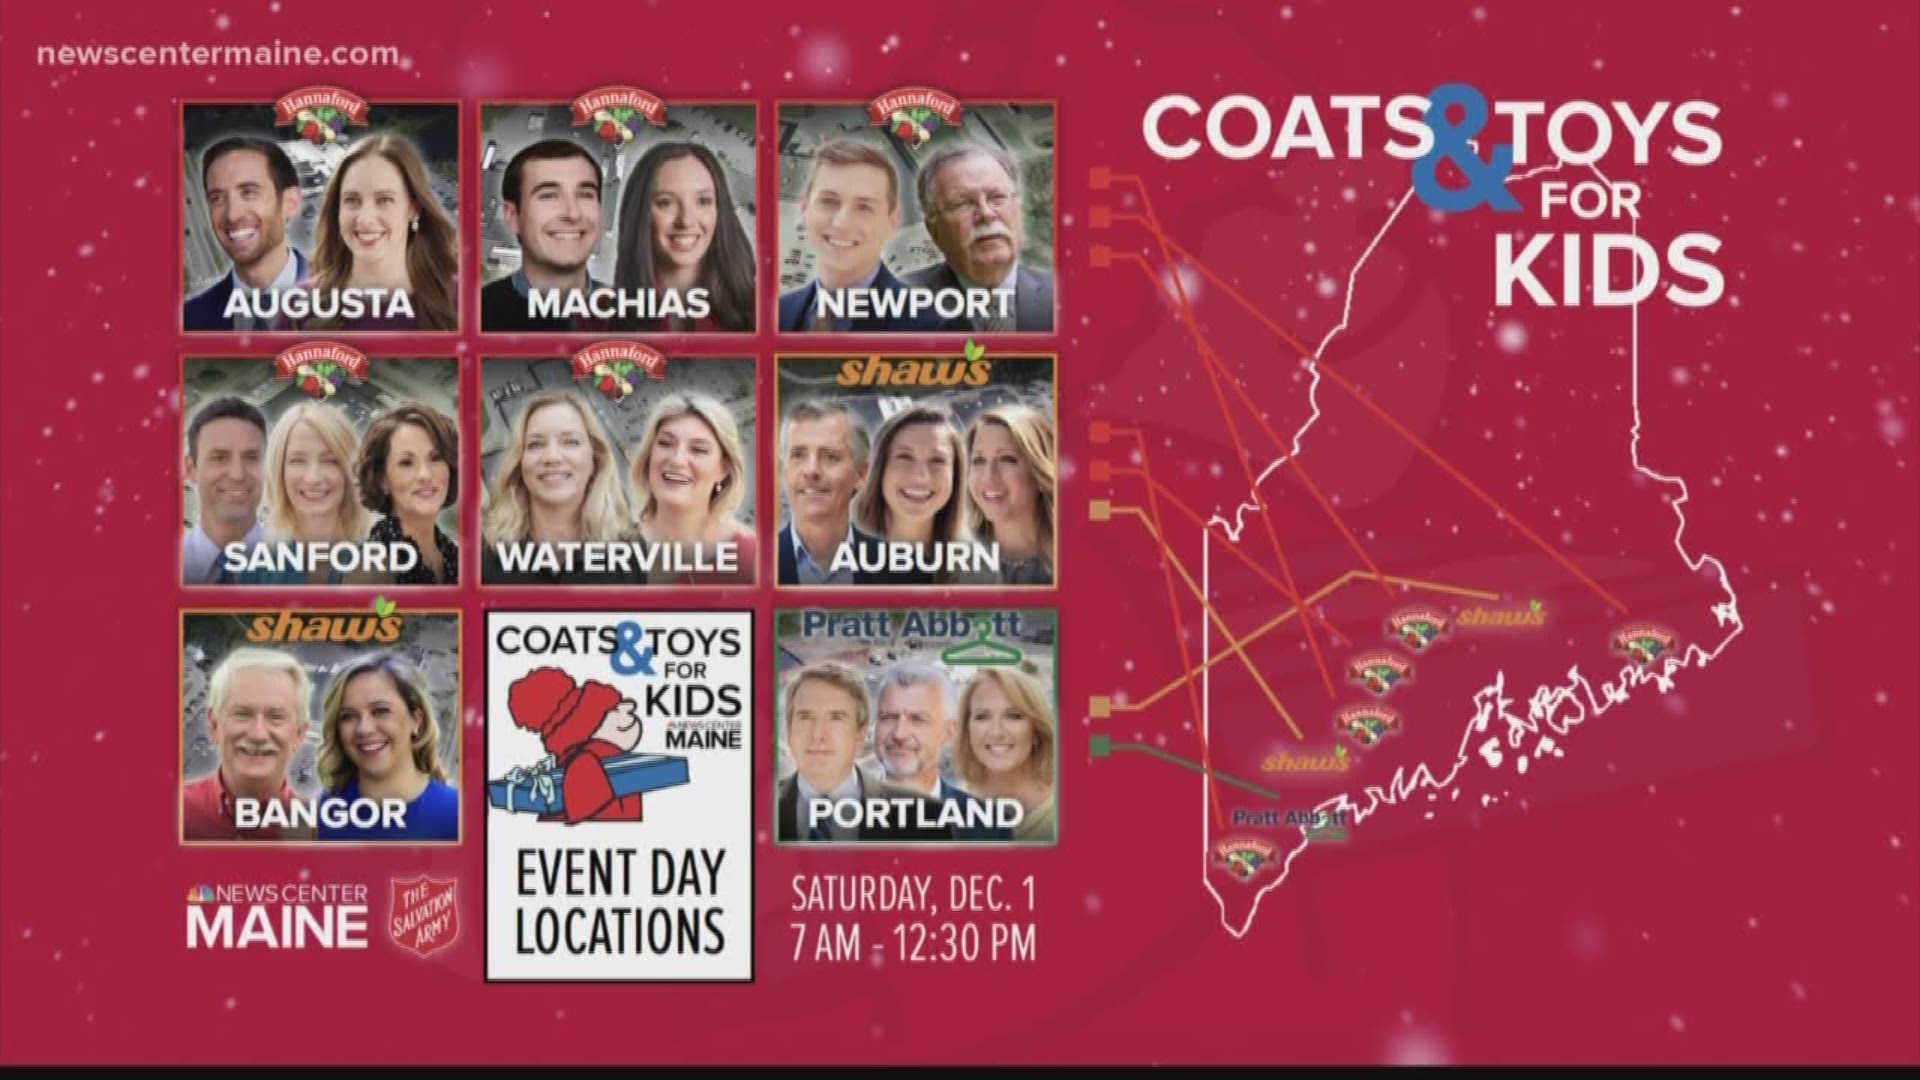 Coats & Toys for Kids Day is tomorrow, Dec. 1